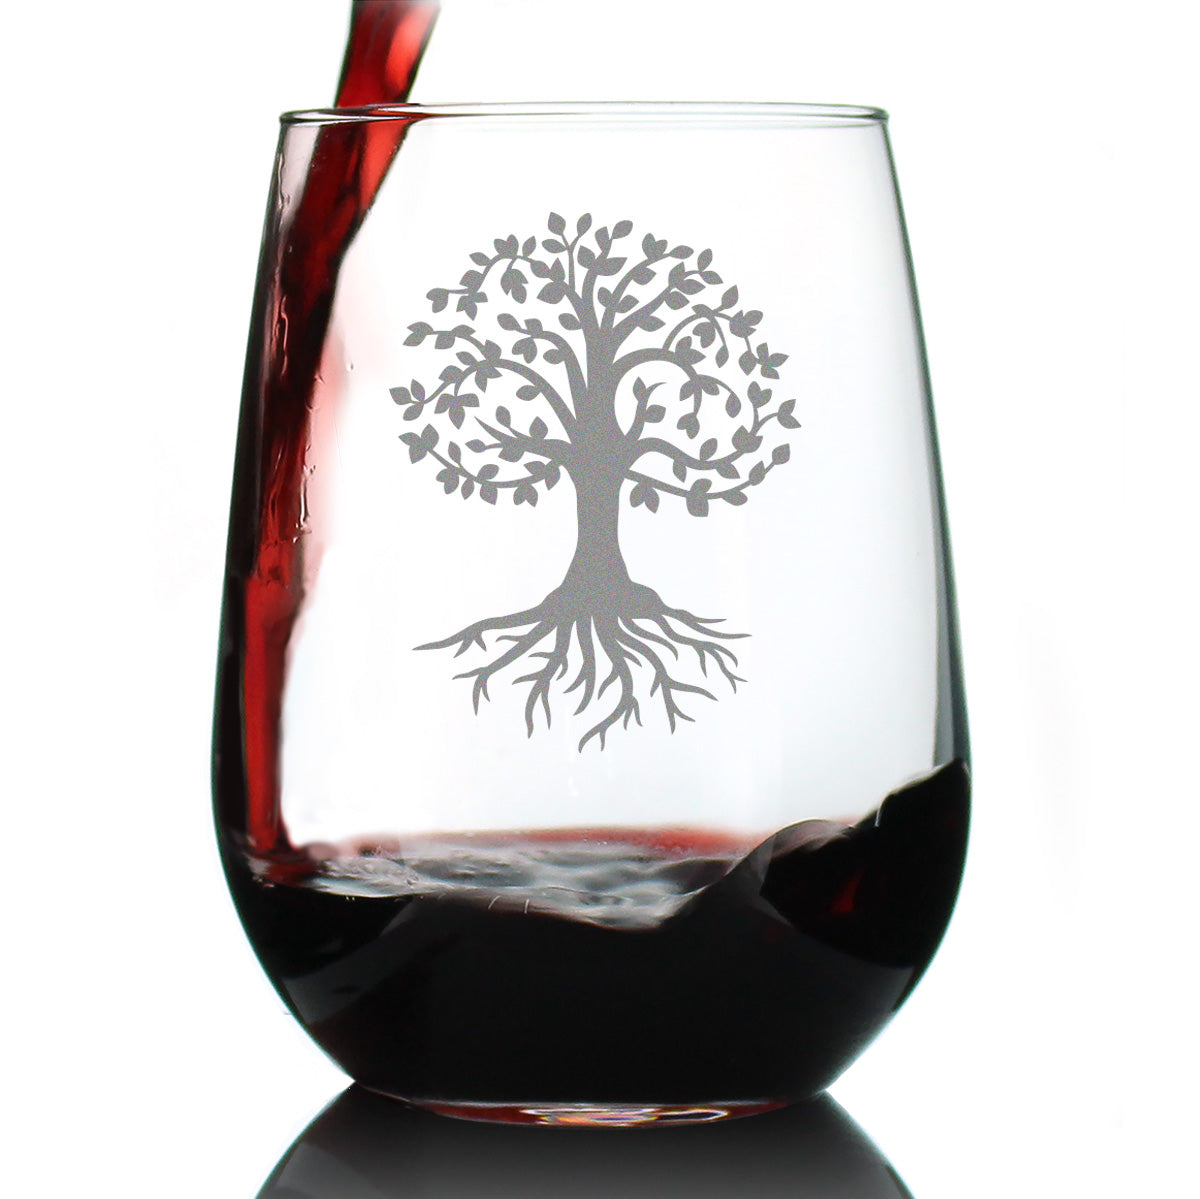 Tree Of Life - Stemless Wine Glass - Cute Family Themed Gifts and Decor - Large 17 Oz Glass